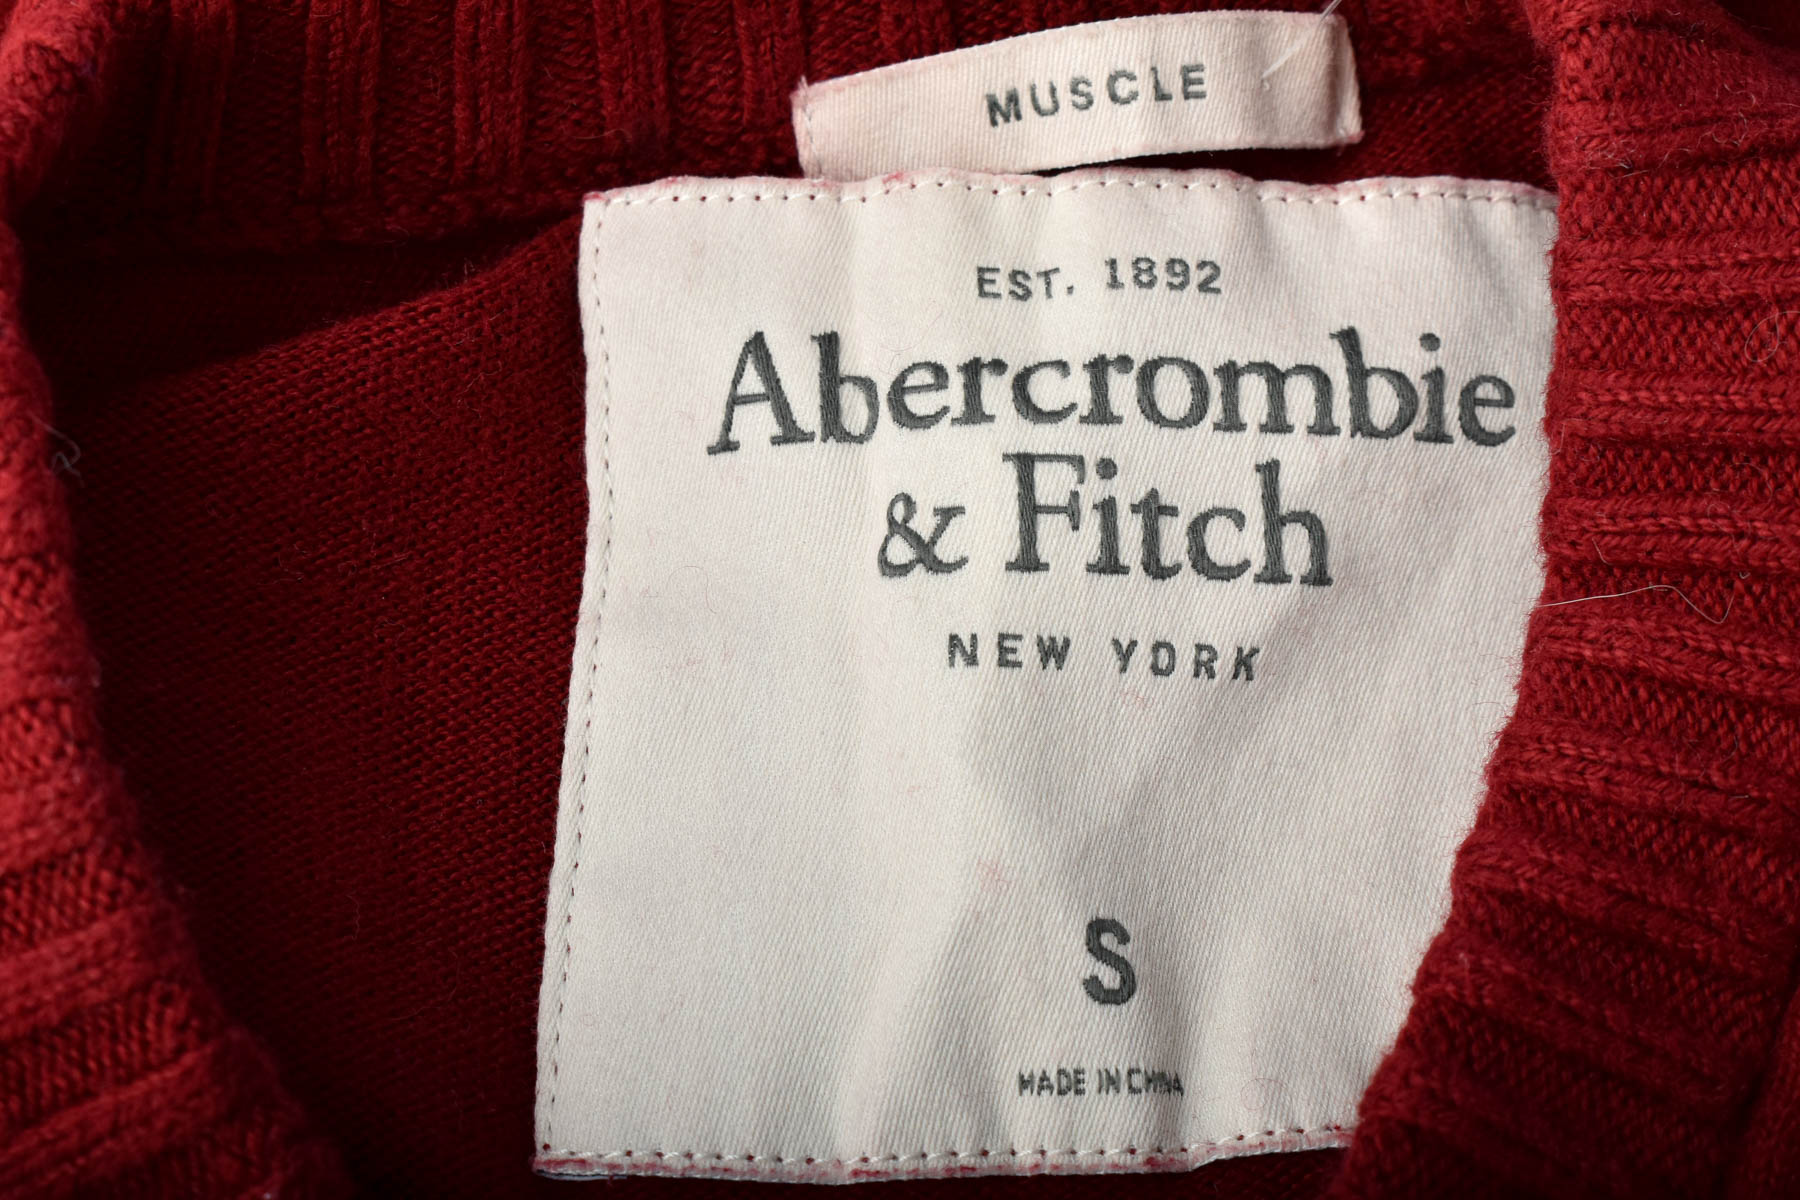 Men's sweater - Abercrombie & Fitch - 2